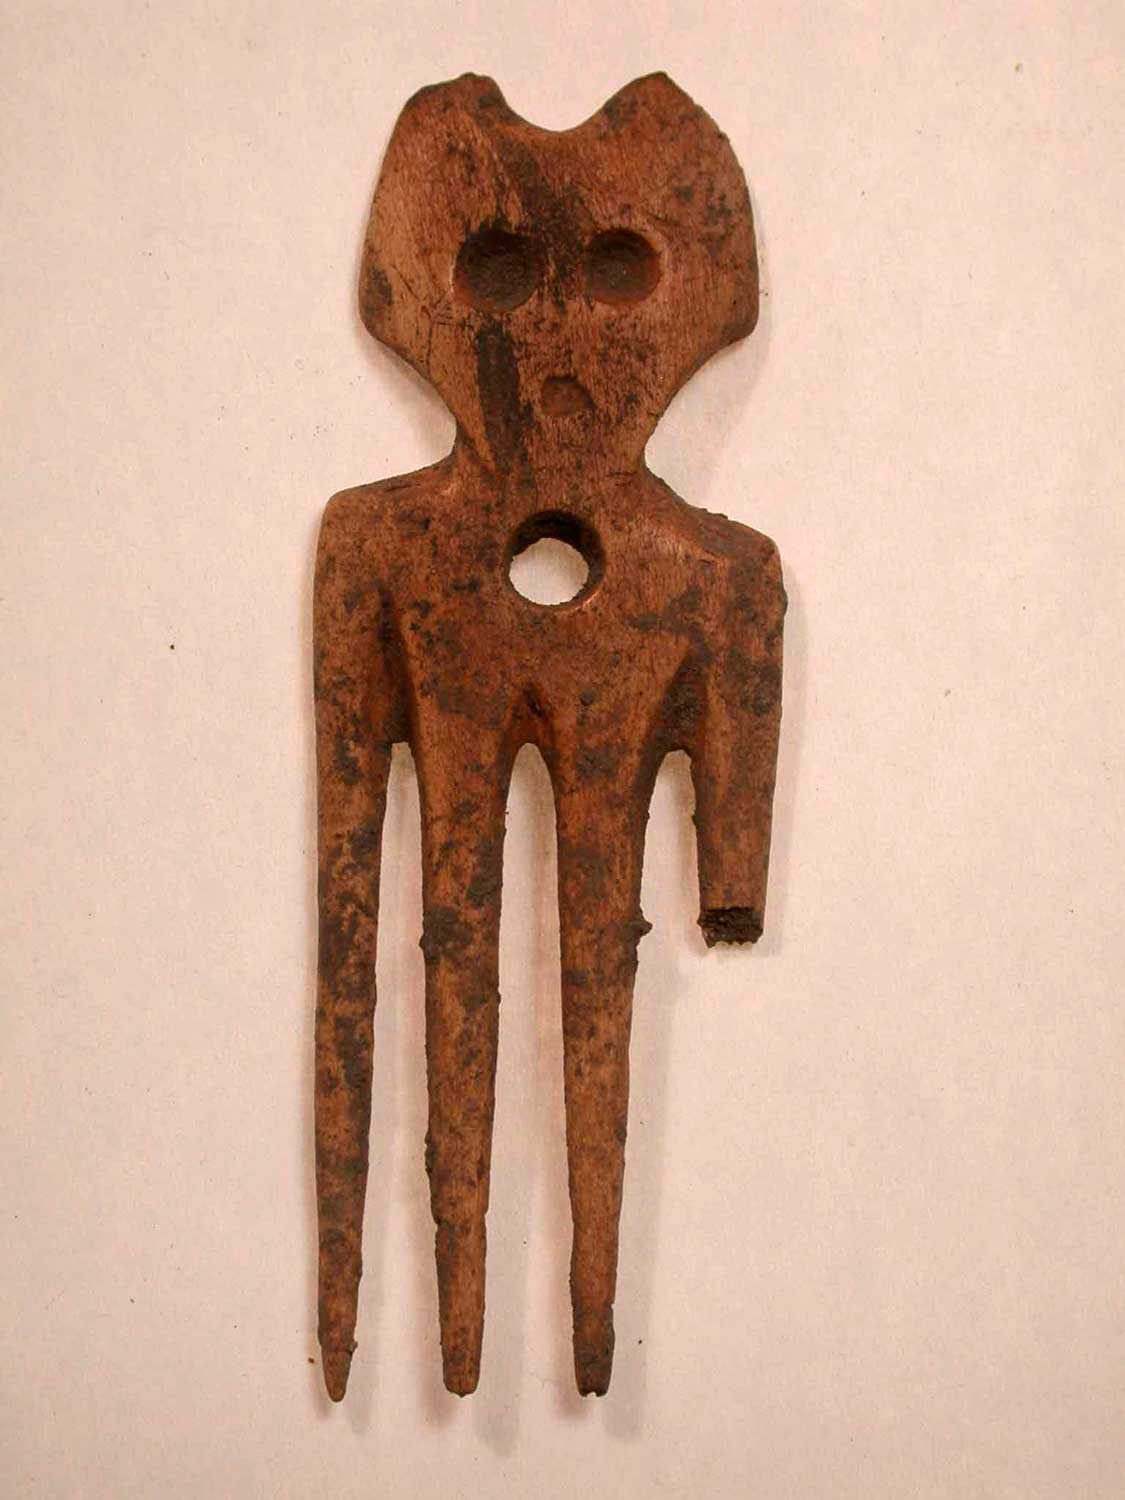 Antler effigy comb recovered in 2007 at the Lawson Iroquoian village site, London (Photo courtesy of Robert Pearce)